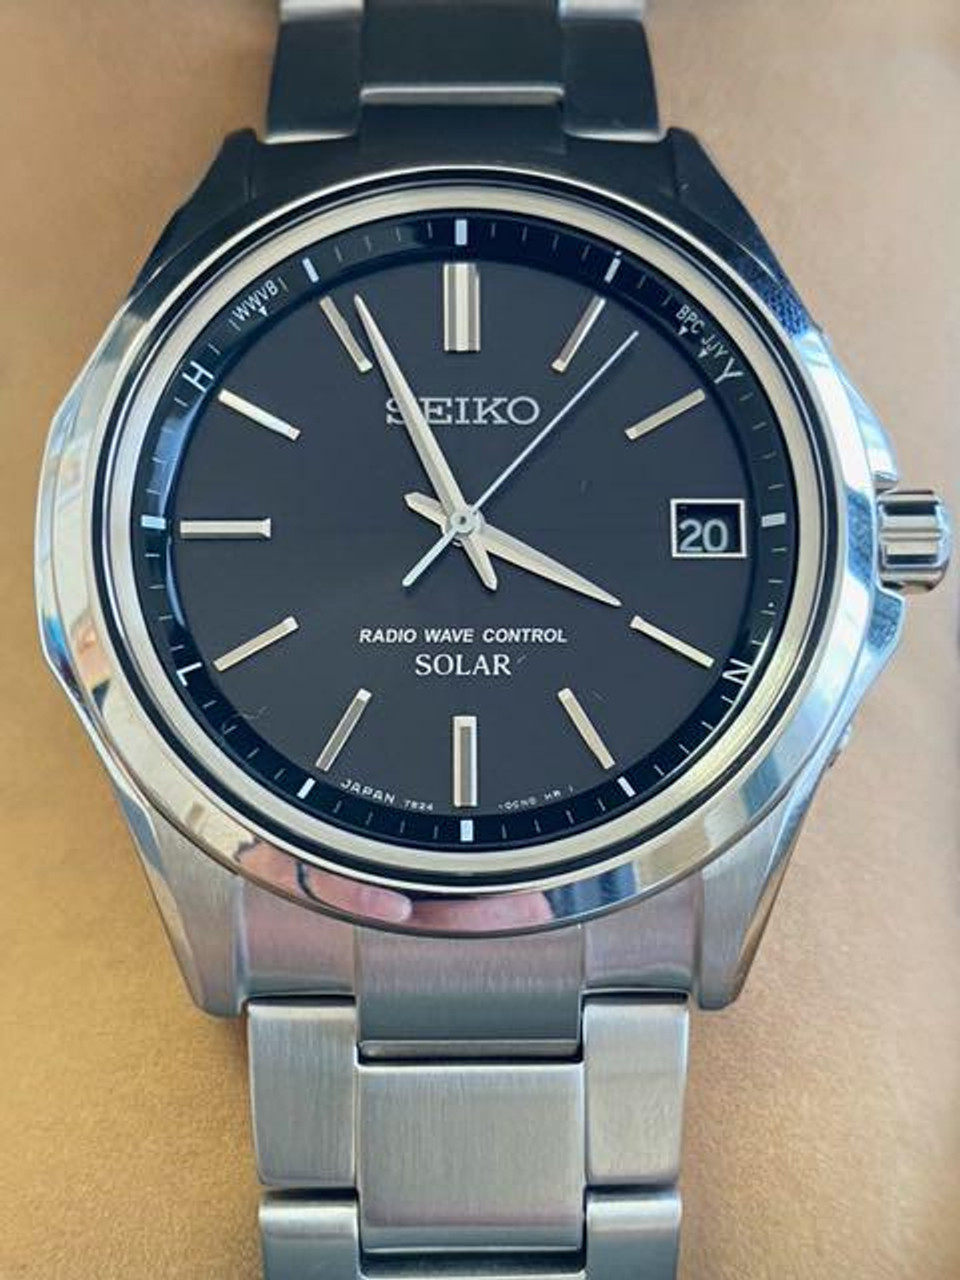 Seiko Brightz 7B24-0BN0 Stainless Steel RADIO WAVE CONTROL Solar Mens Watch  - Japan Pre-owned Vintage